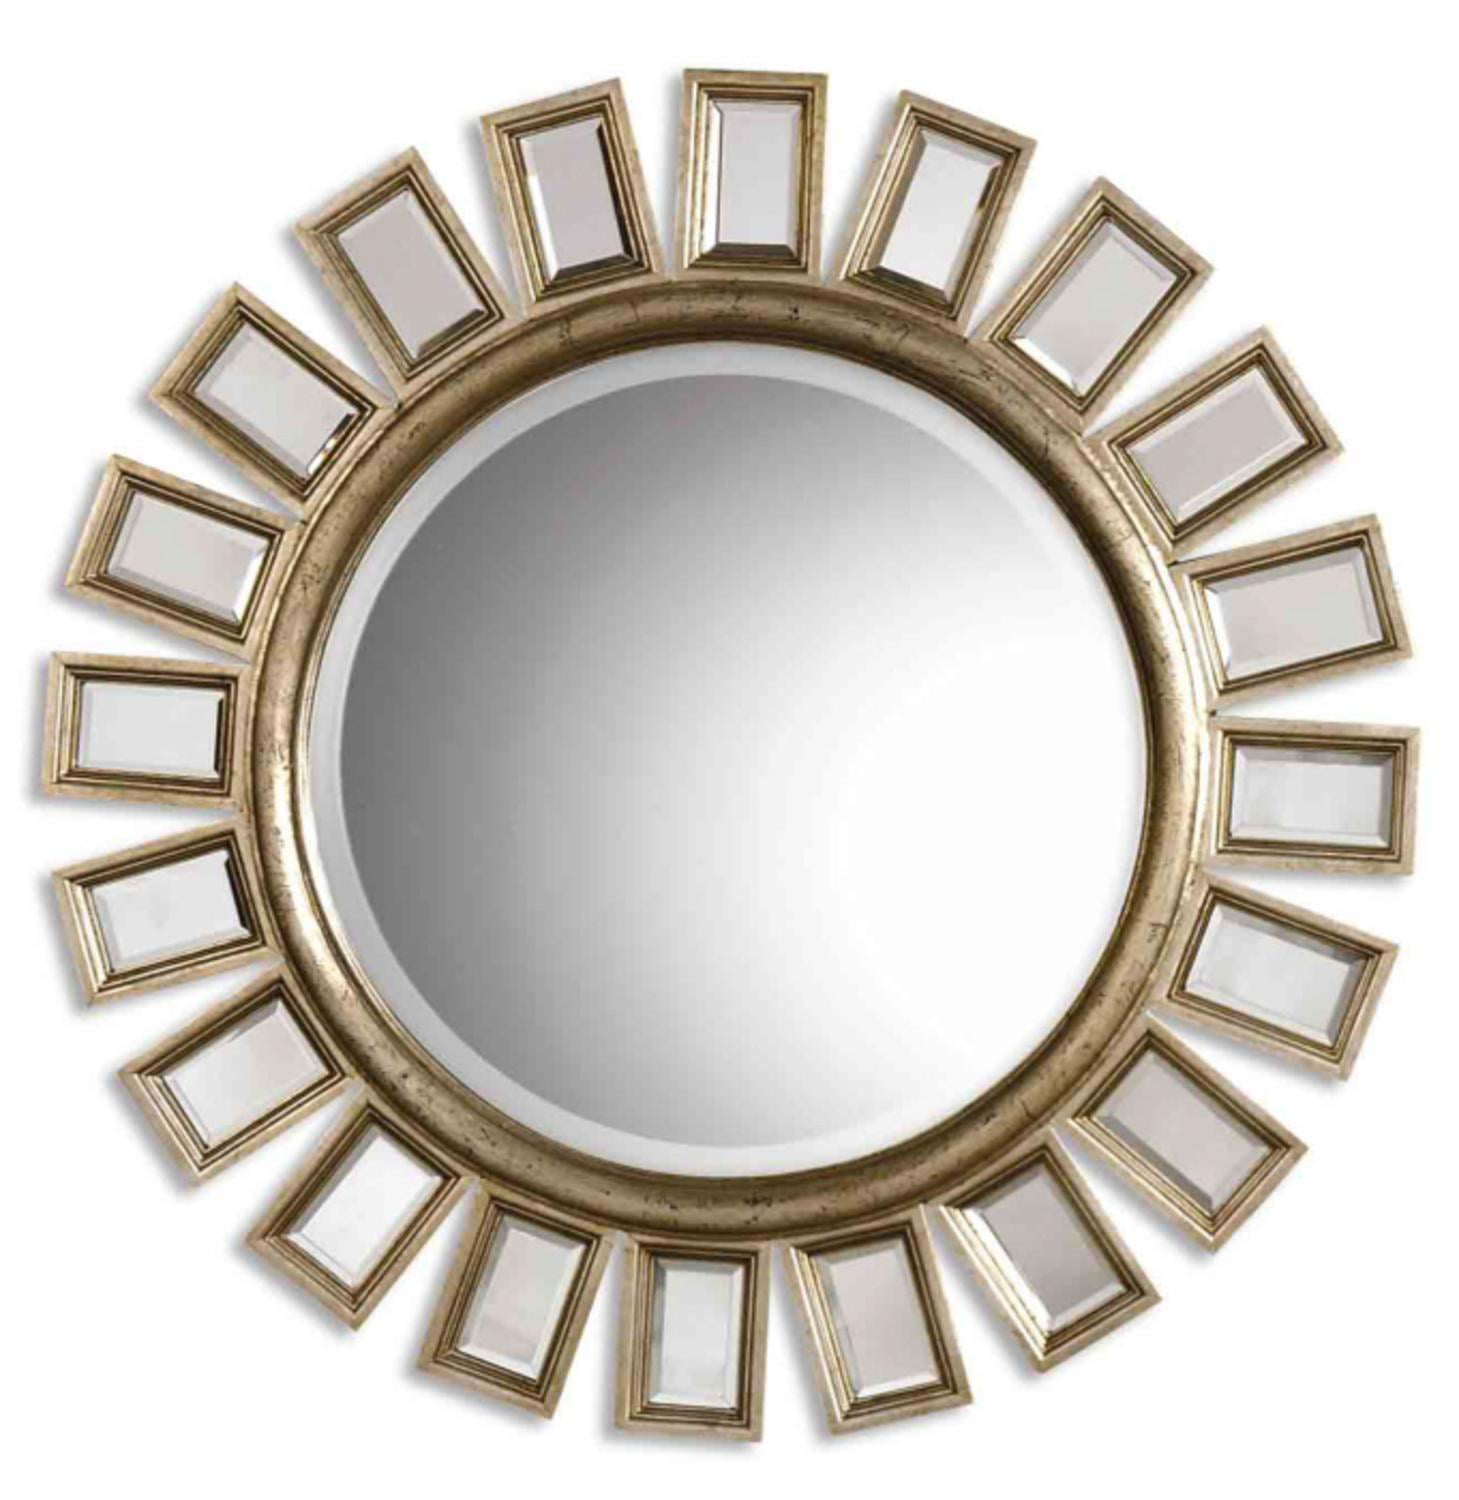 34" Distressed Silver Leaf Finish with Small Mirrors Framed Round Wall